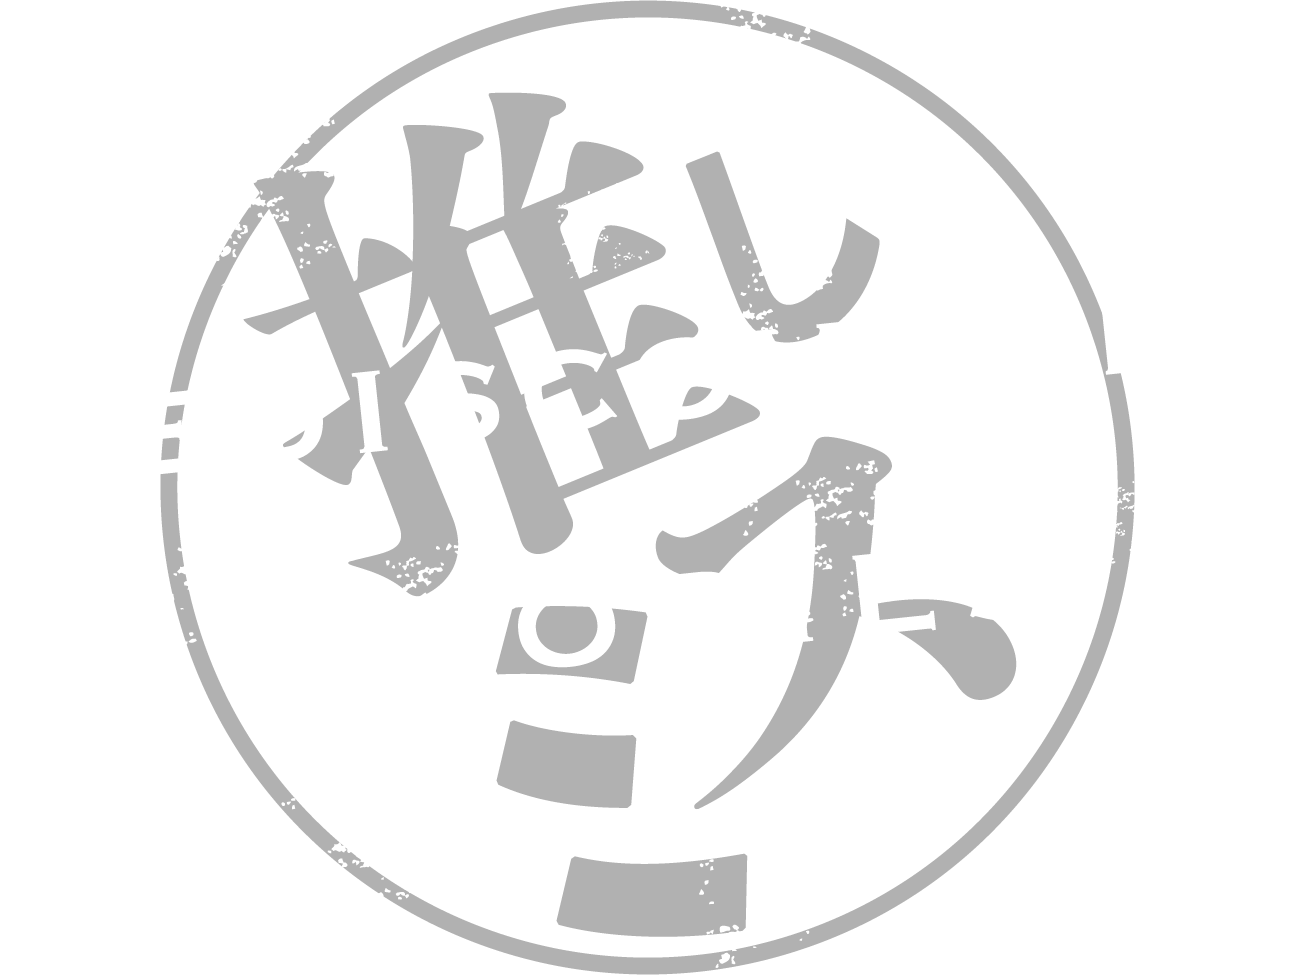 rediscovered stories